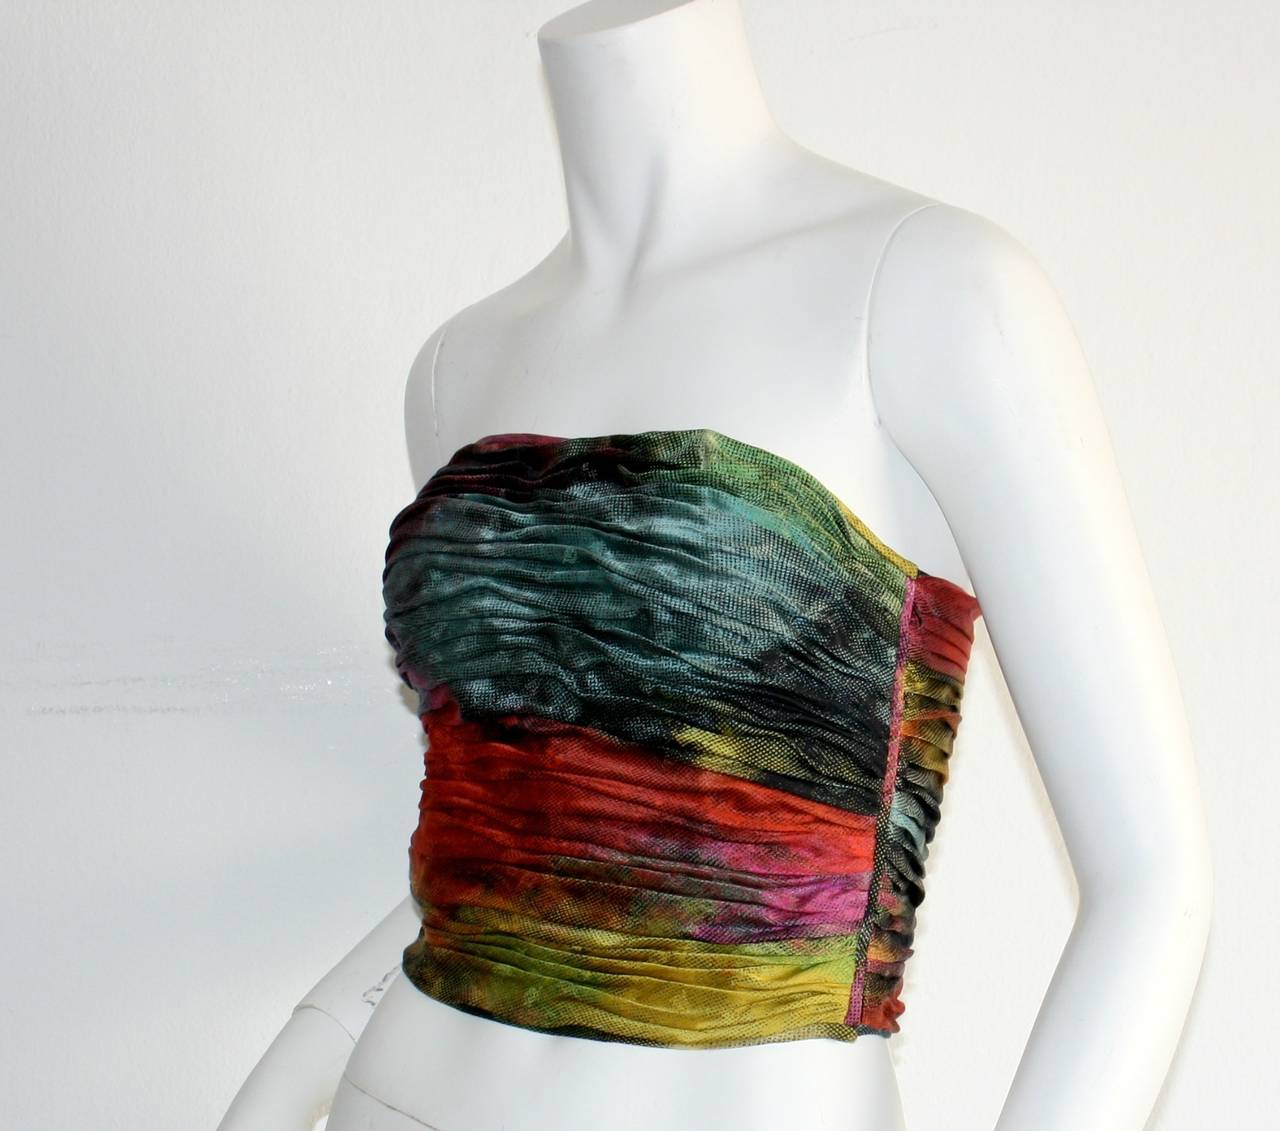 Gorgeous vintage Emaunel Ungaro silk ruched bustier blouse! Obre effect, with slimming detail. Hidden zipper up the side. Fully lined. In great condition. Approximately Size Small

Measurements:
36-38 inch bust
26 inch waist